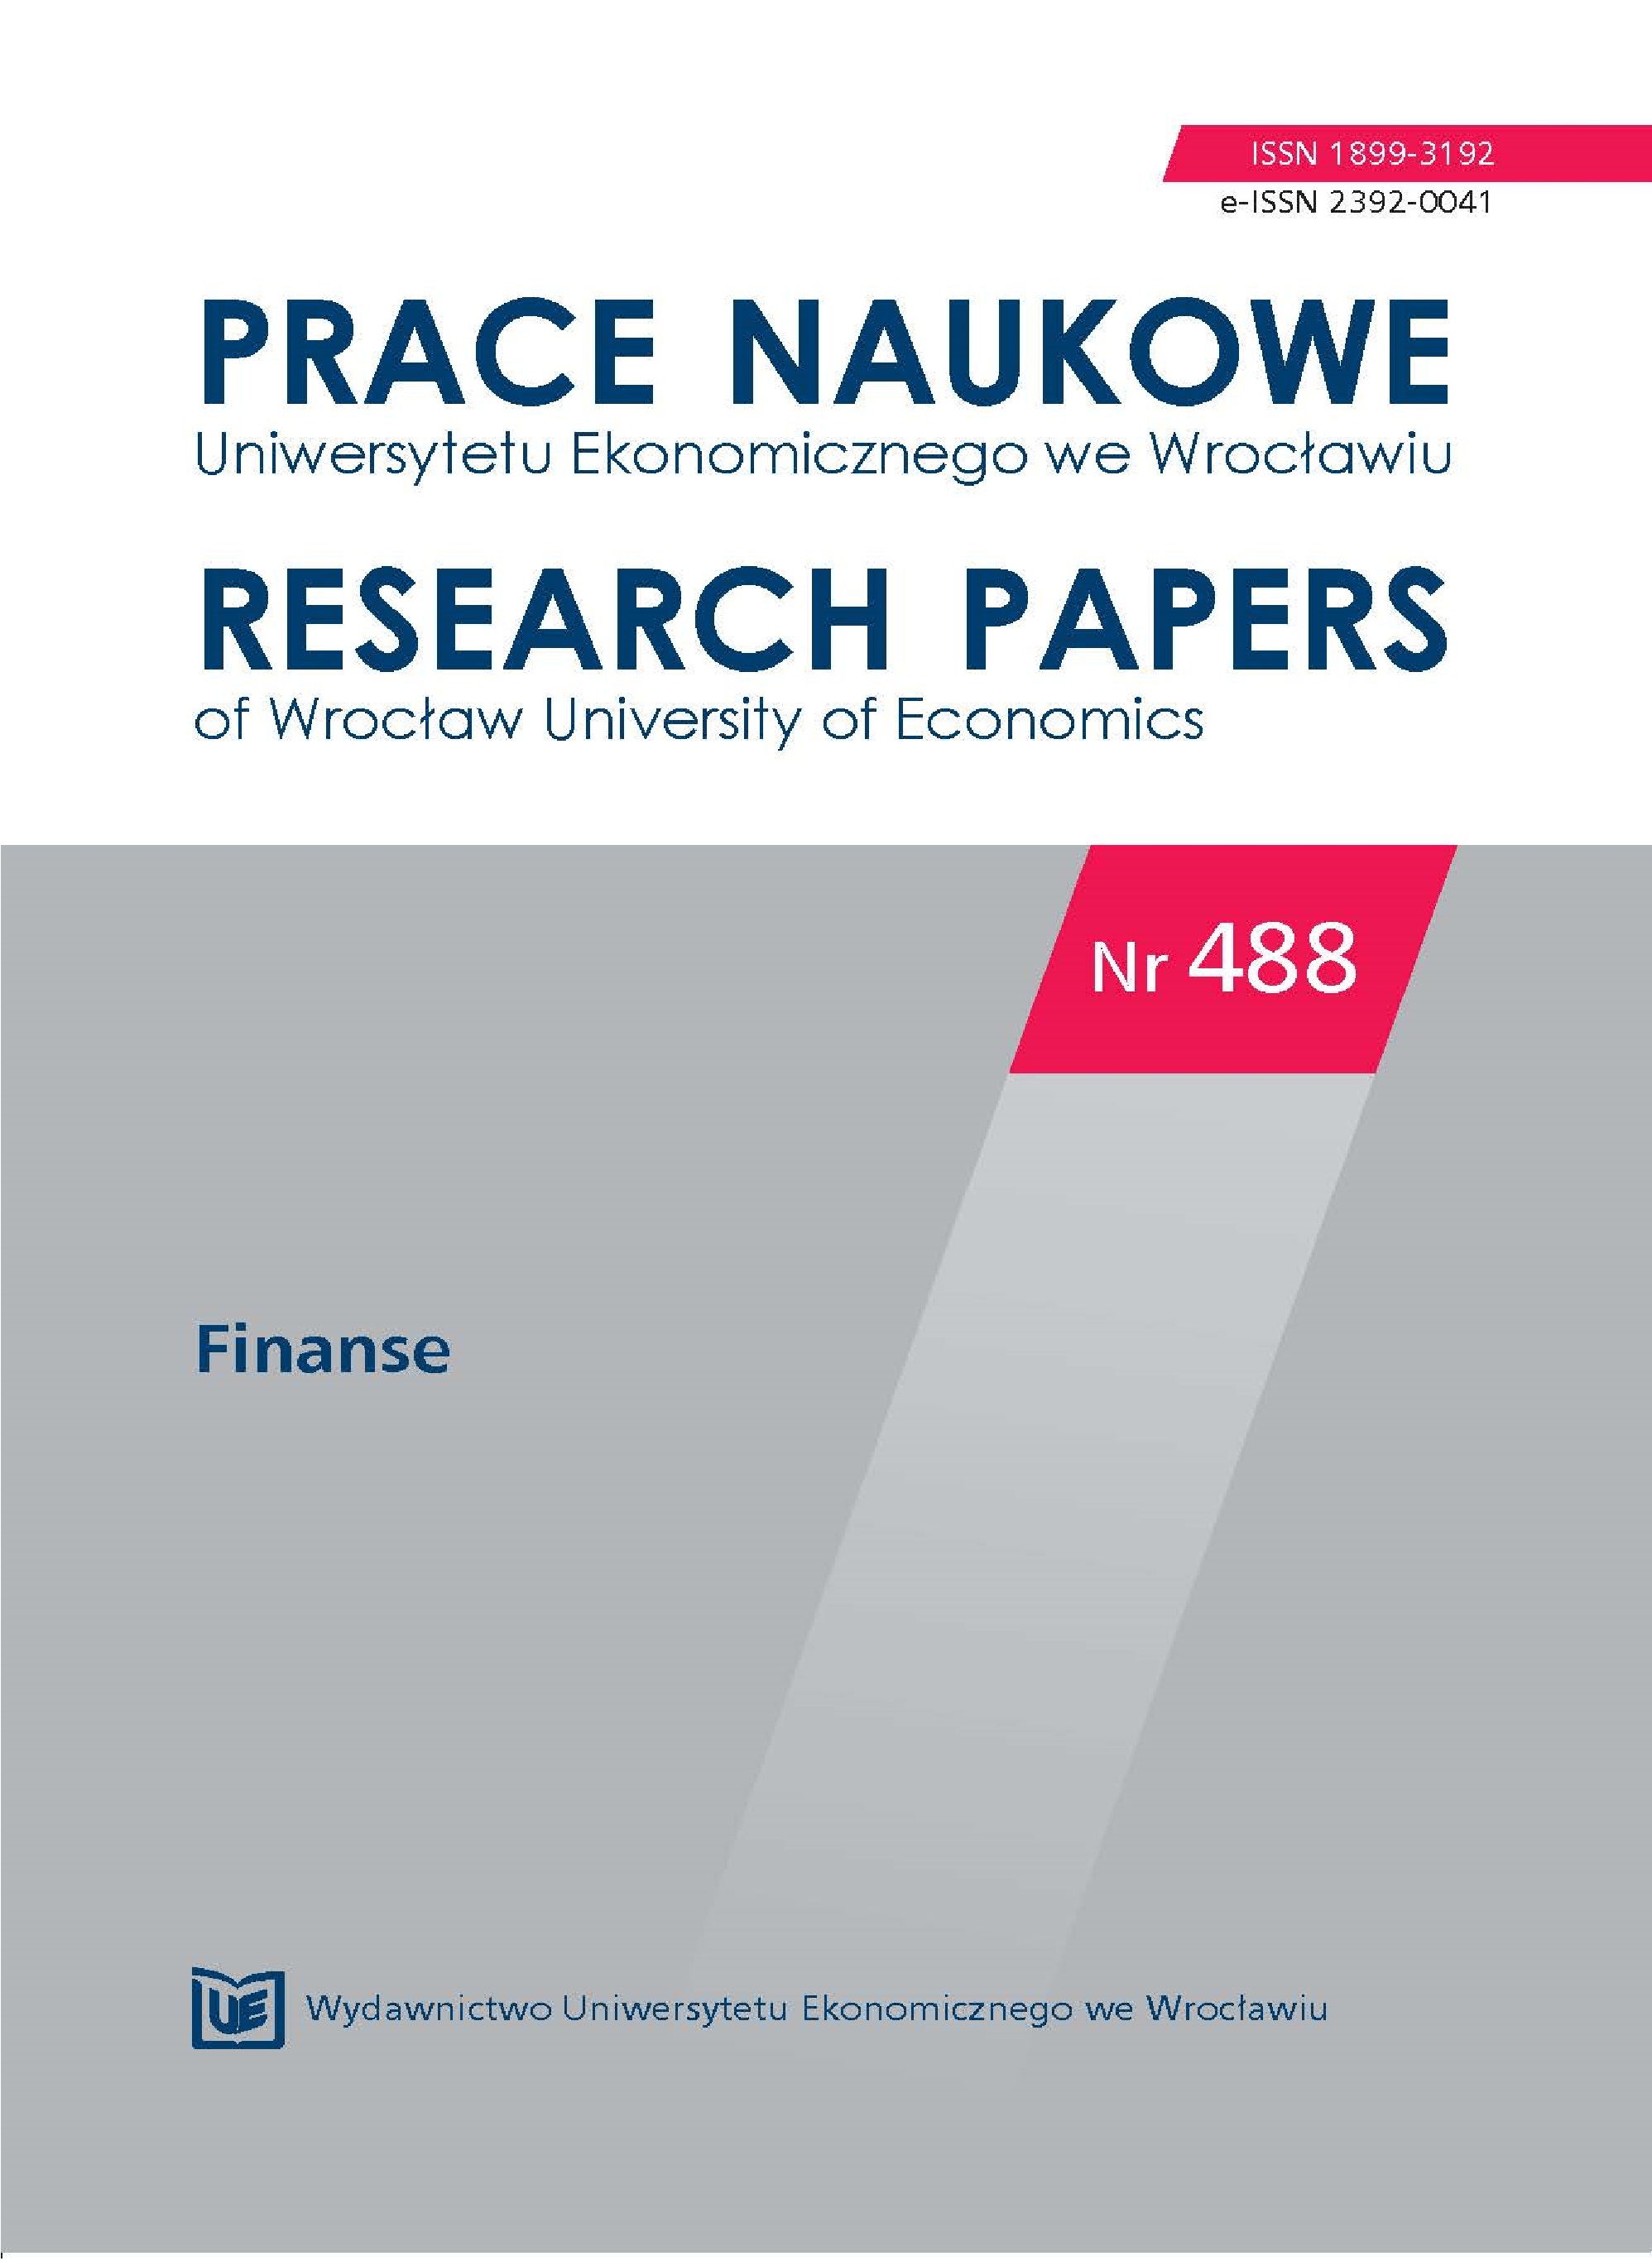 Financial instruments
in cohesion policy in Poland in 2014-2020: can the outcome be optimal? Cover Image